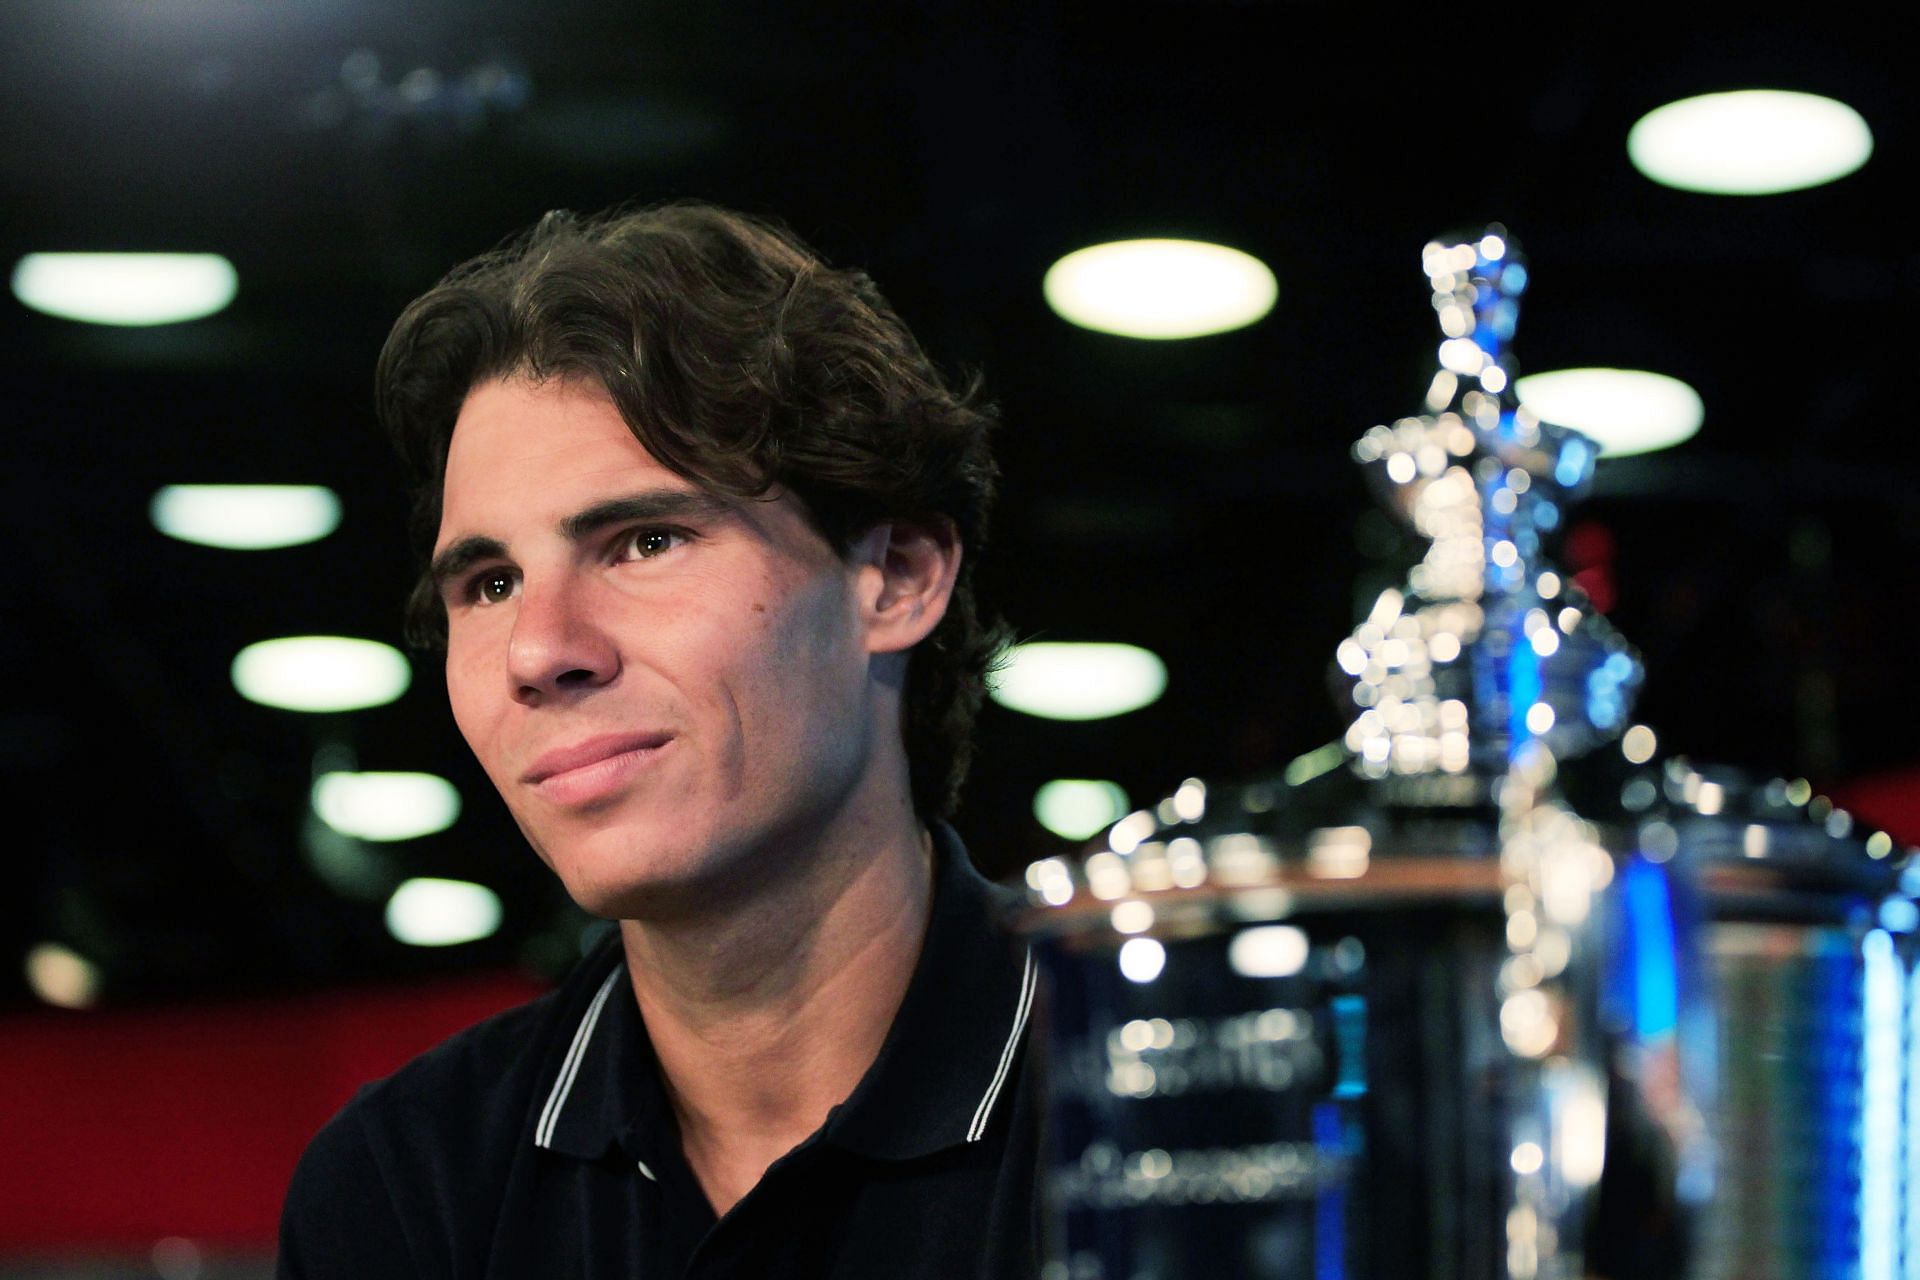 Rafael Nadal won his first US Open title in 2010.